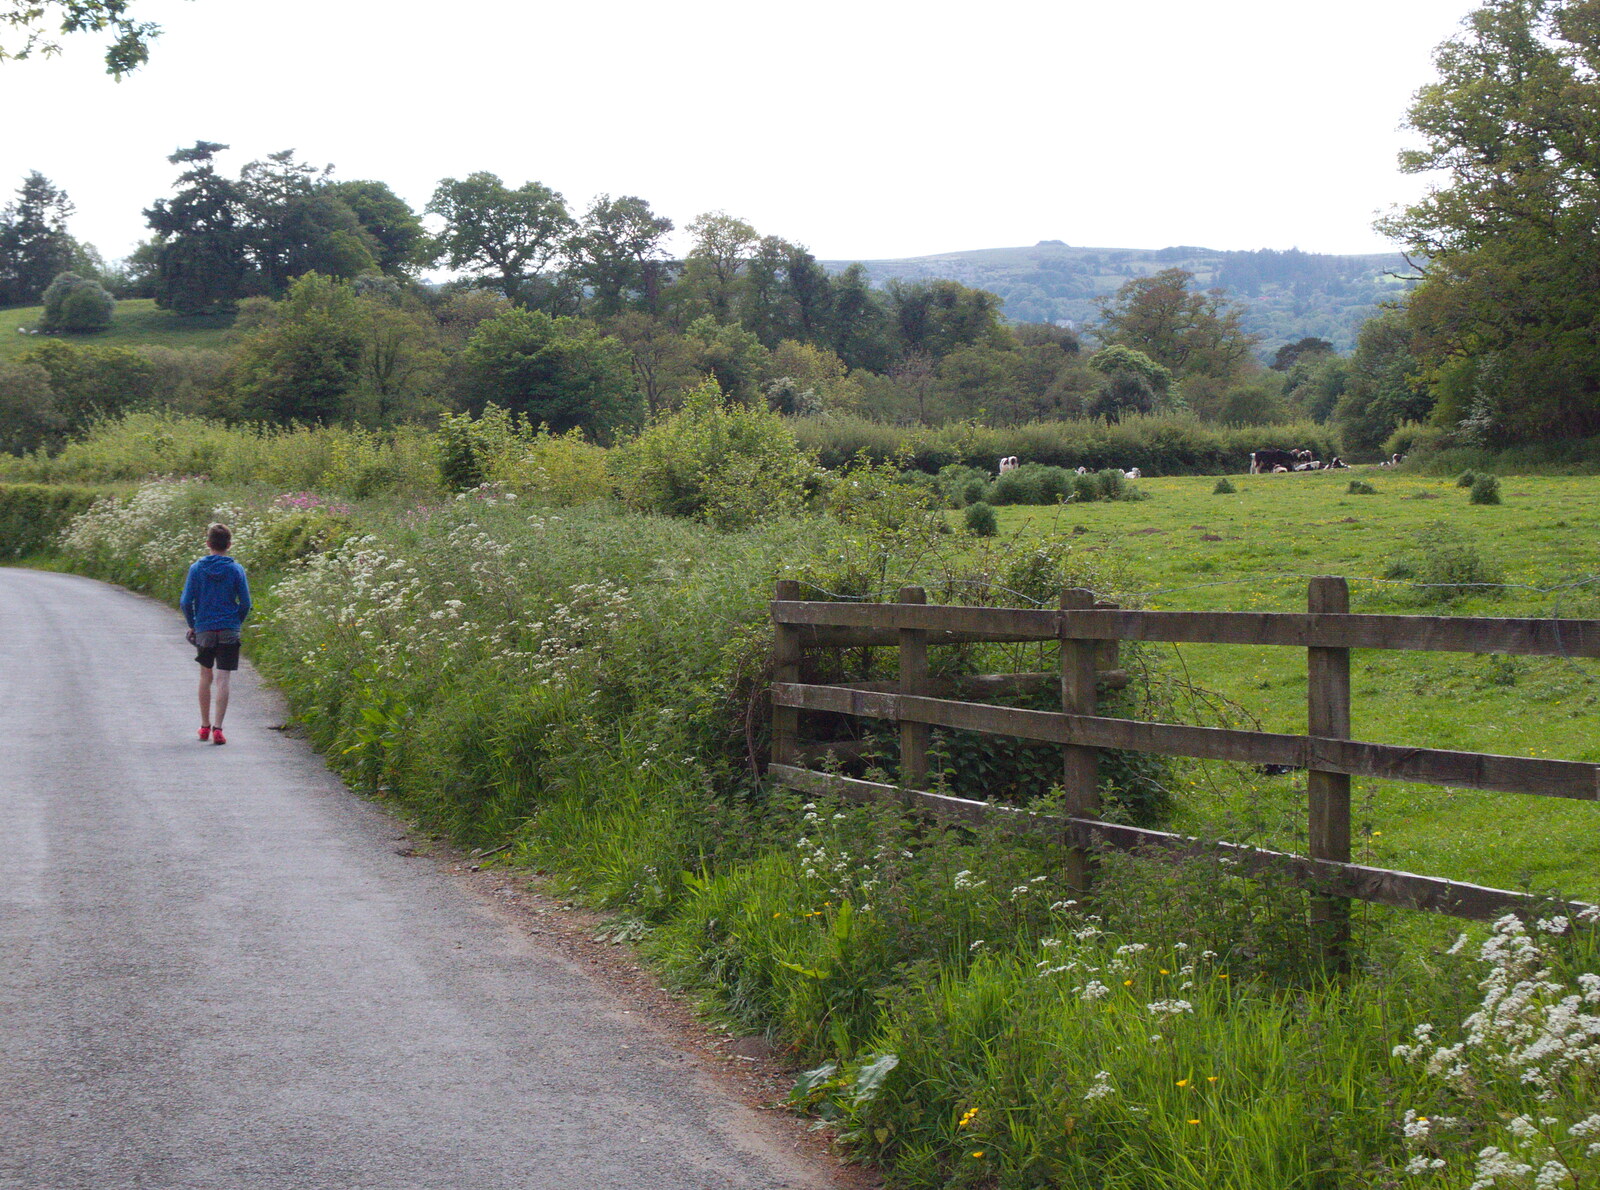 Someone's walking to Chagford from Chagford Lido and a Trip to Parke, Bovey Tracey, Devon - 25th May 2019